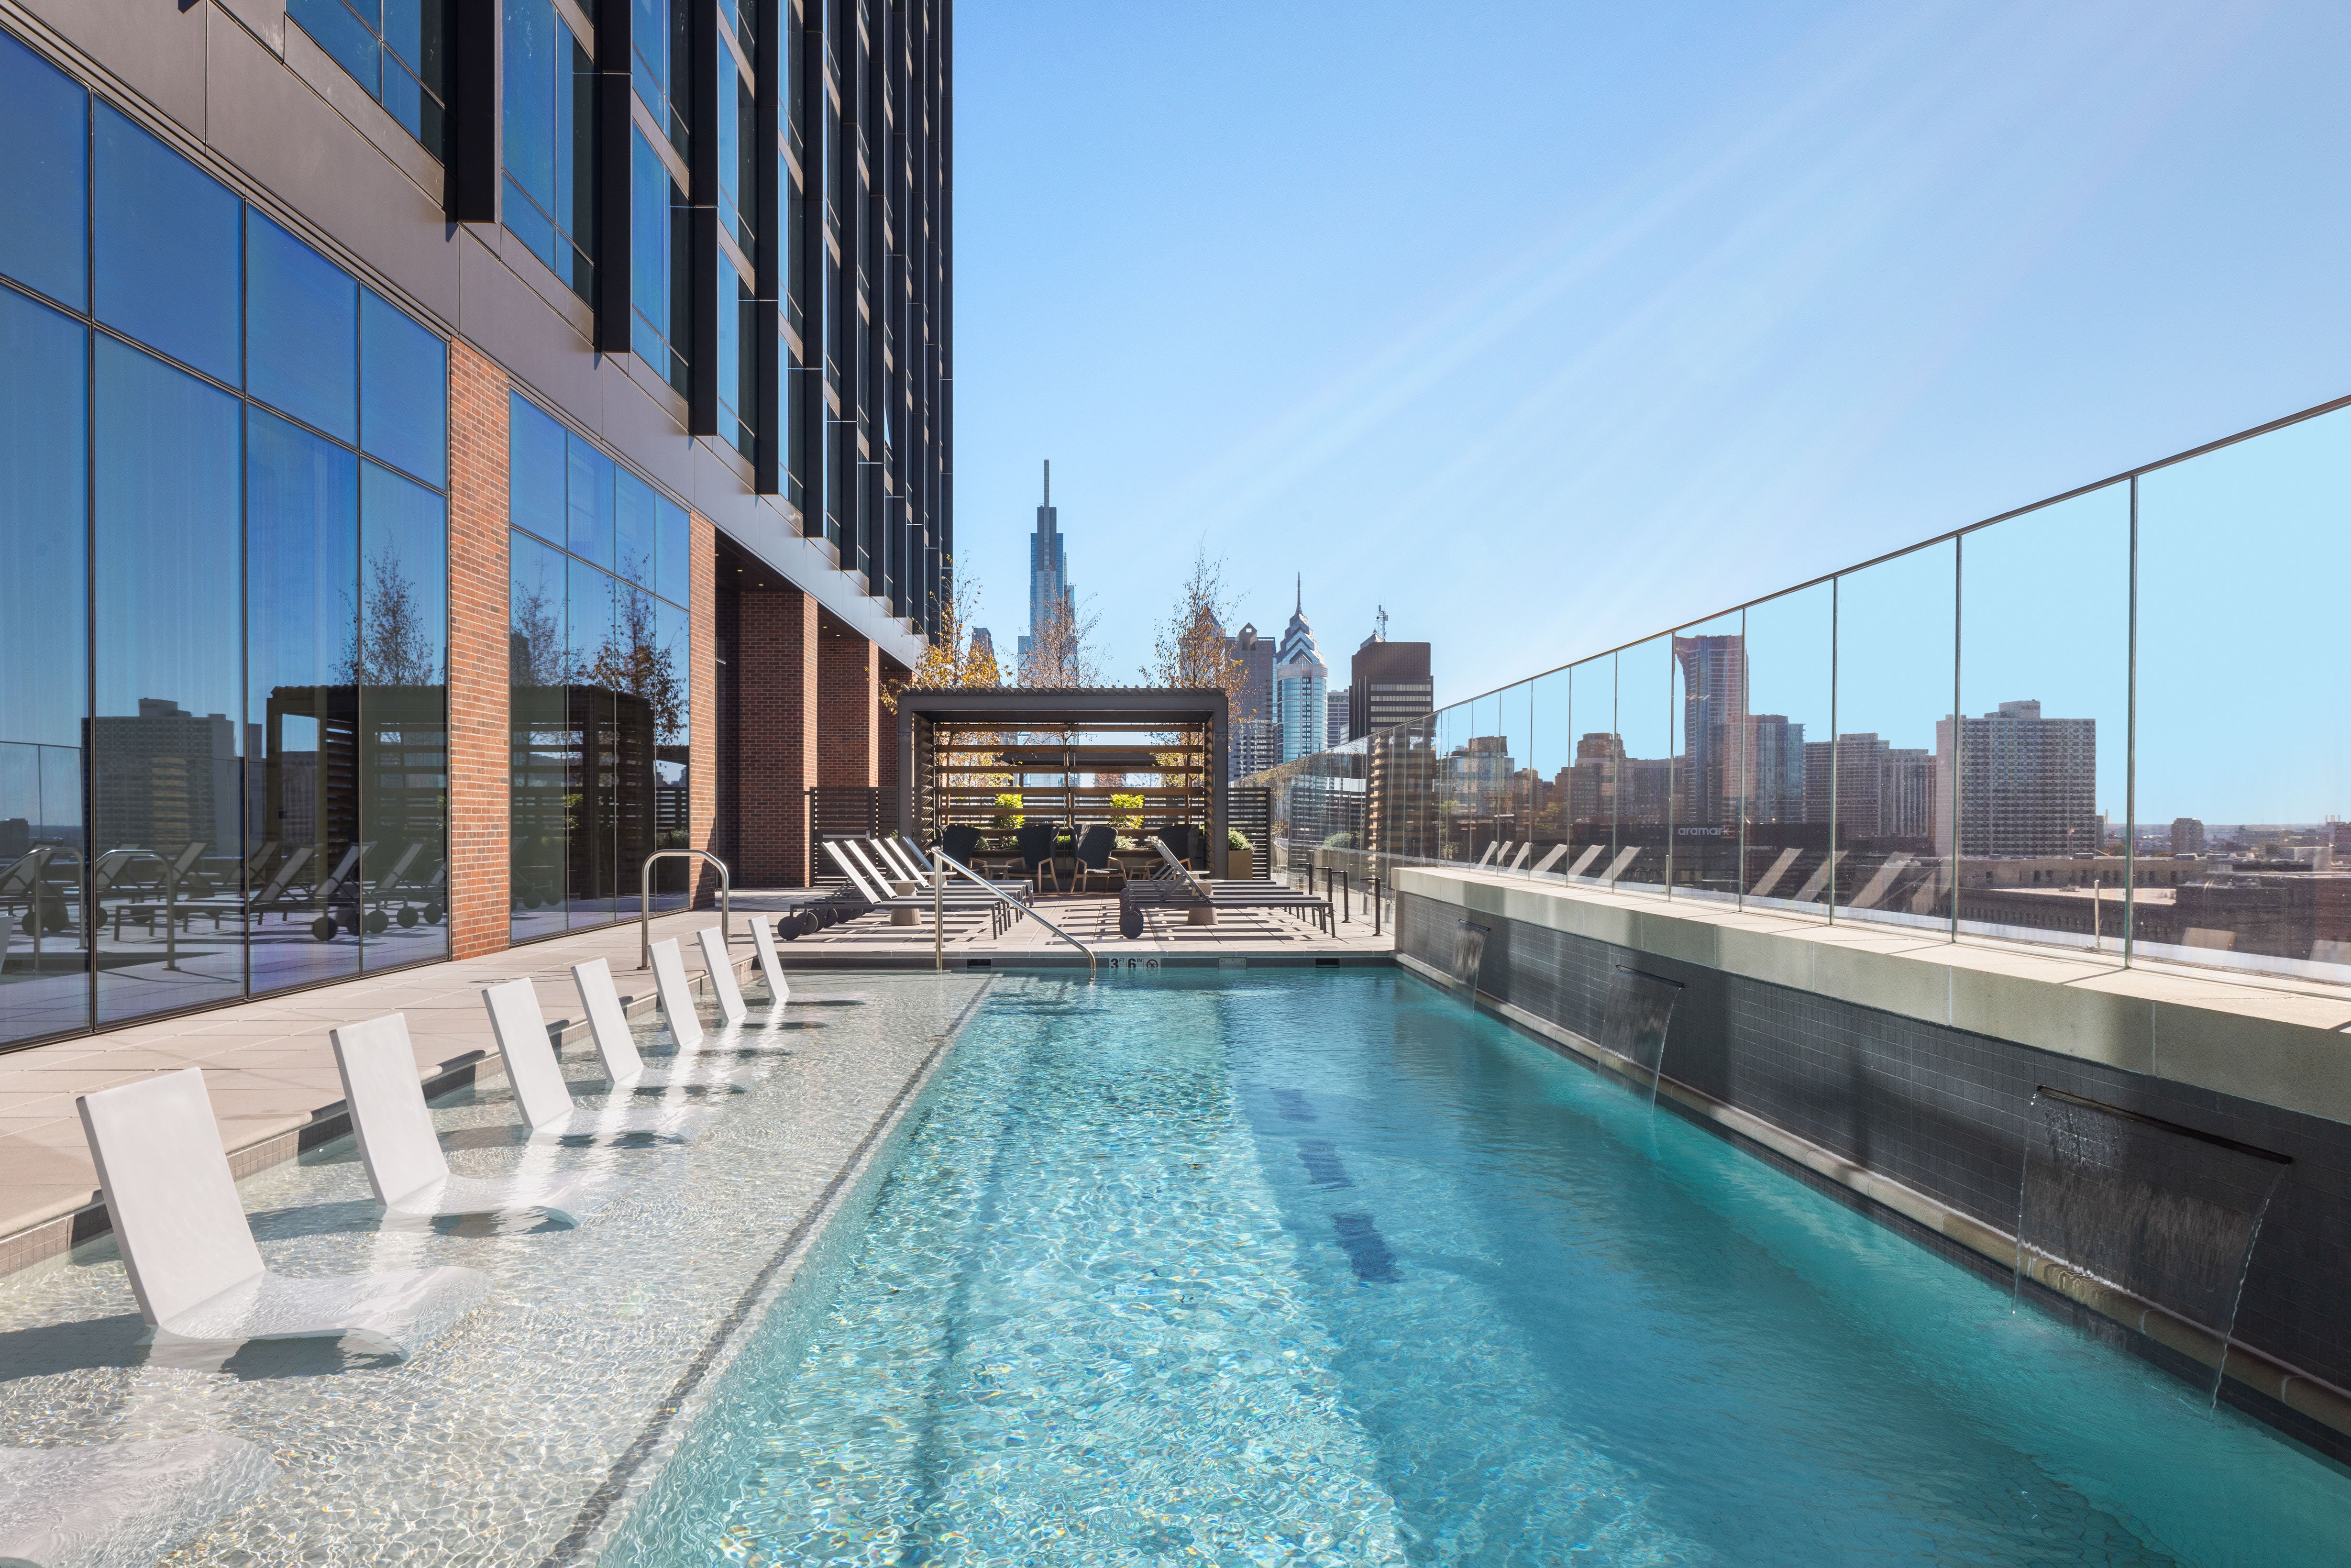 Philadelphia Style: A Cut Above the Rest, Inside Schuylkill Yards' first residential offering, Avira